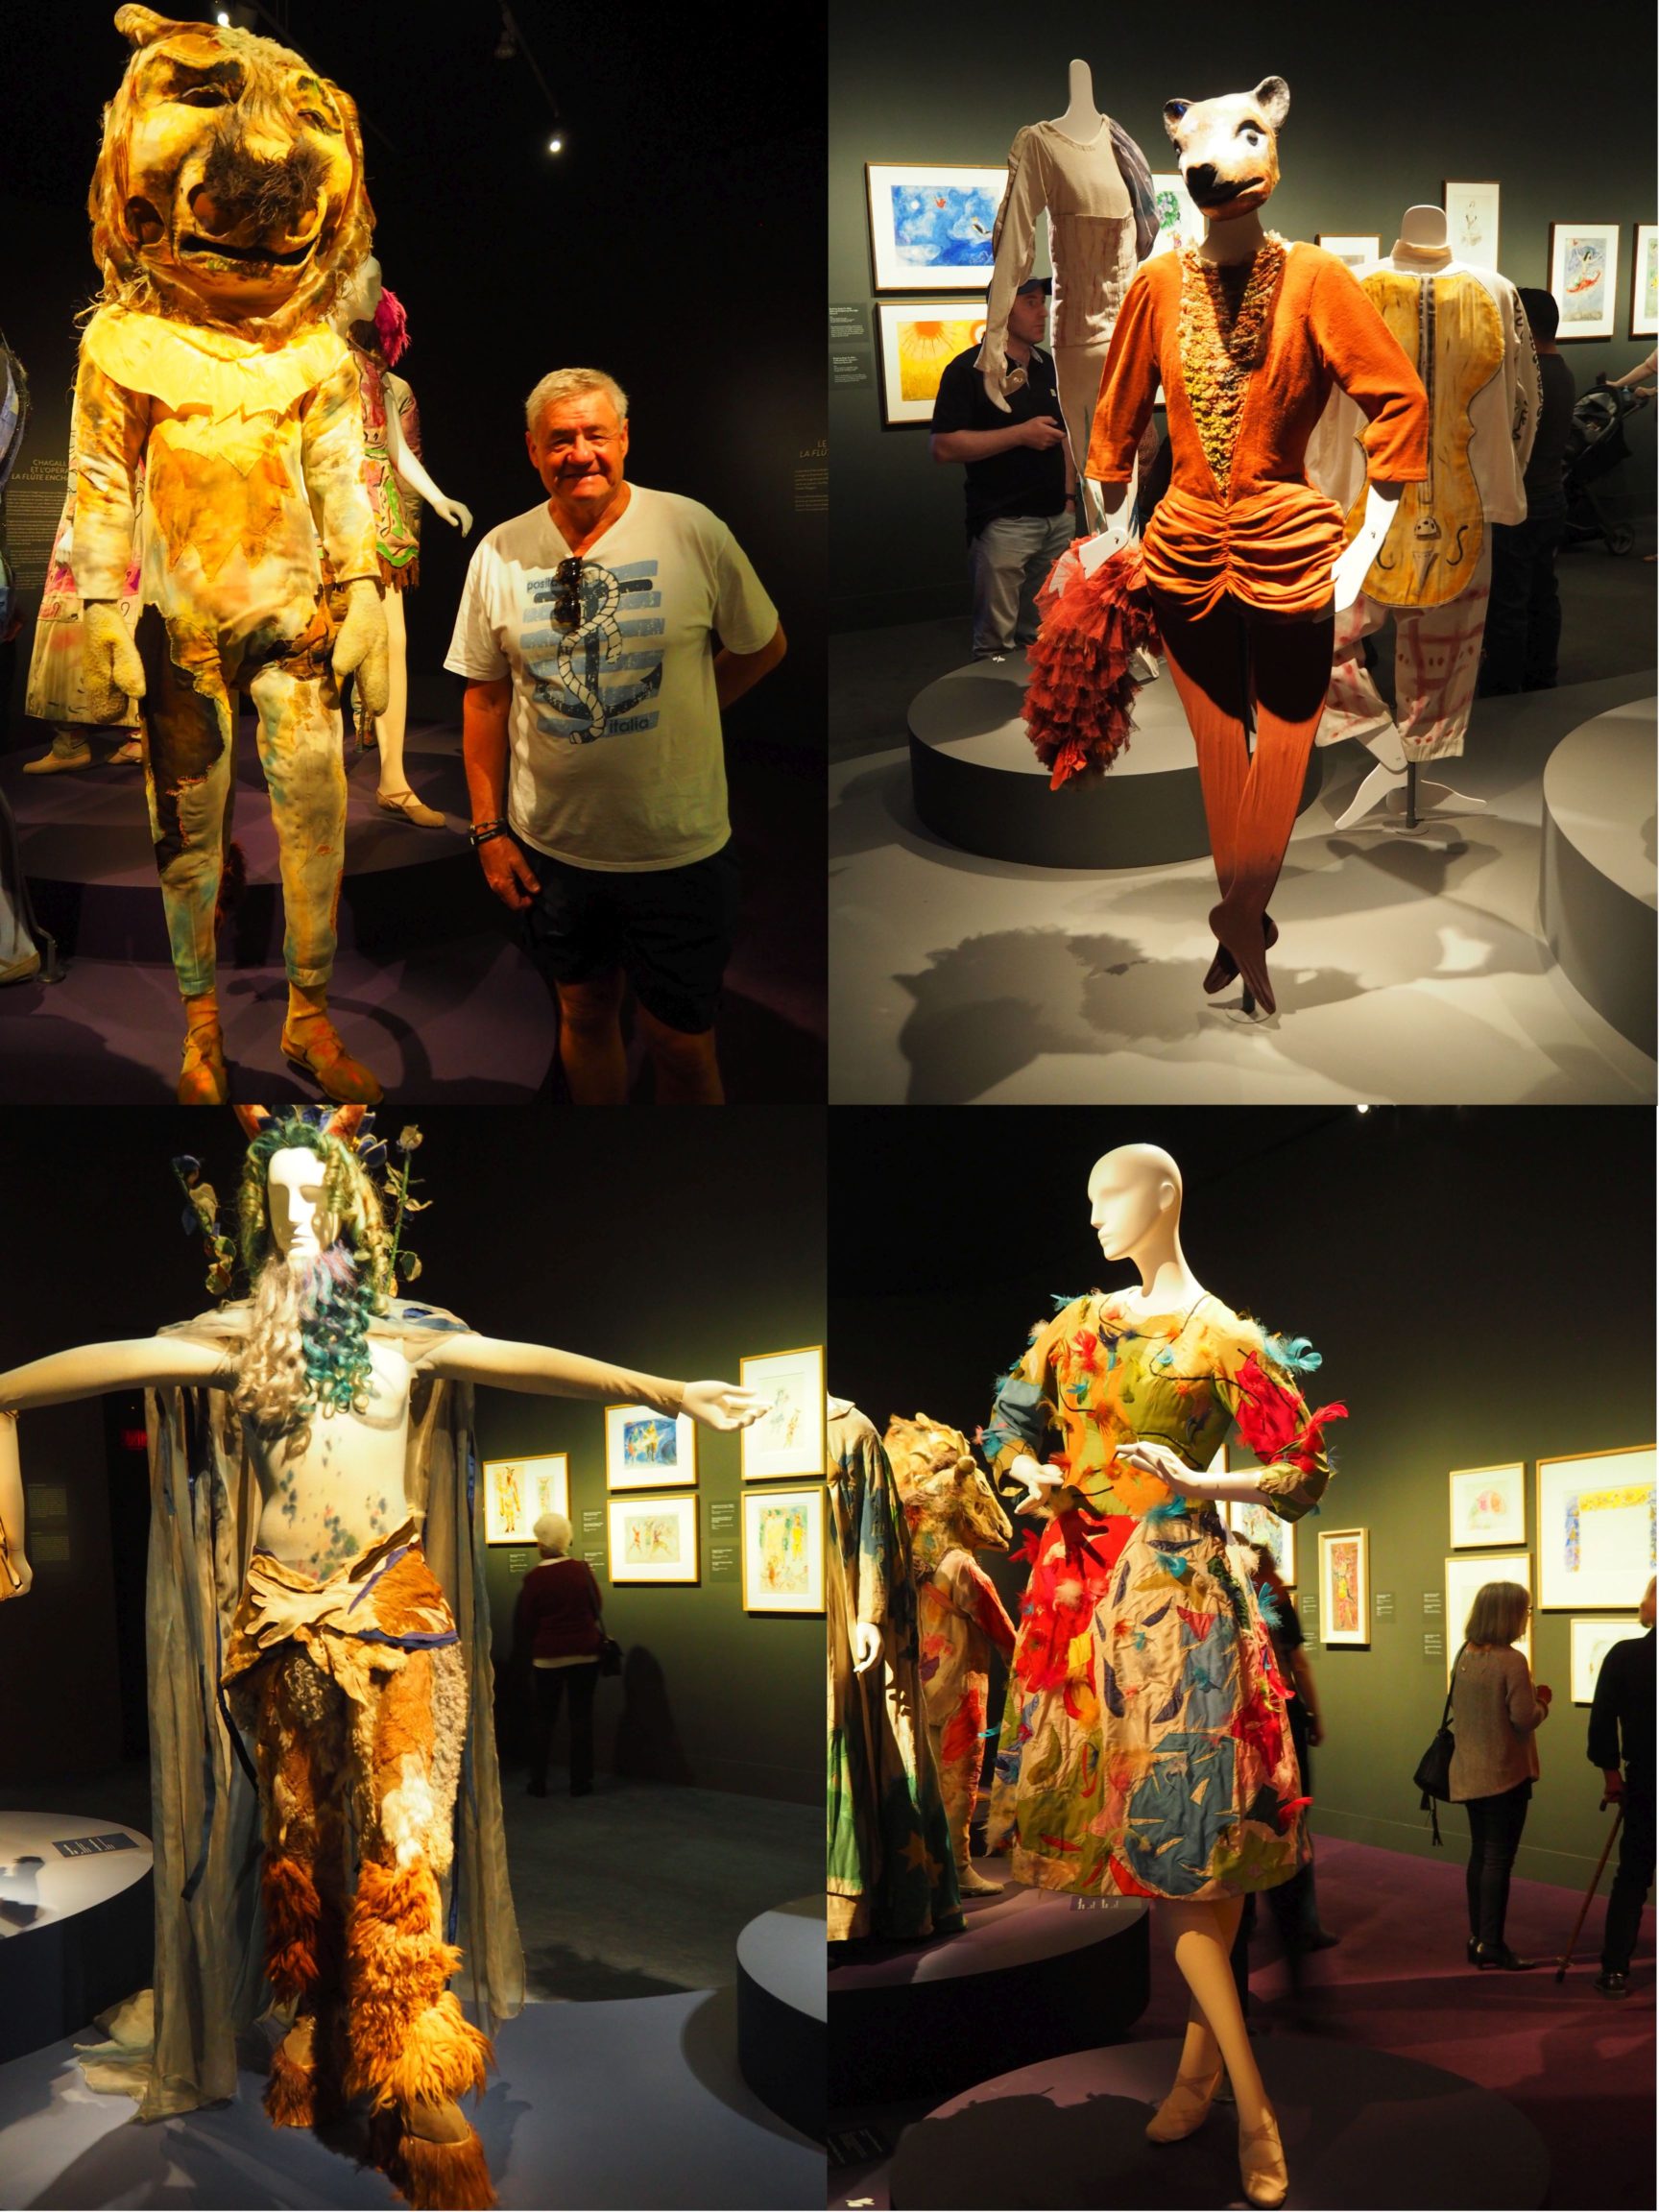 More of Chagall Costumes